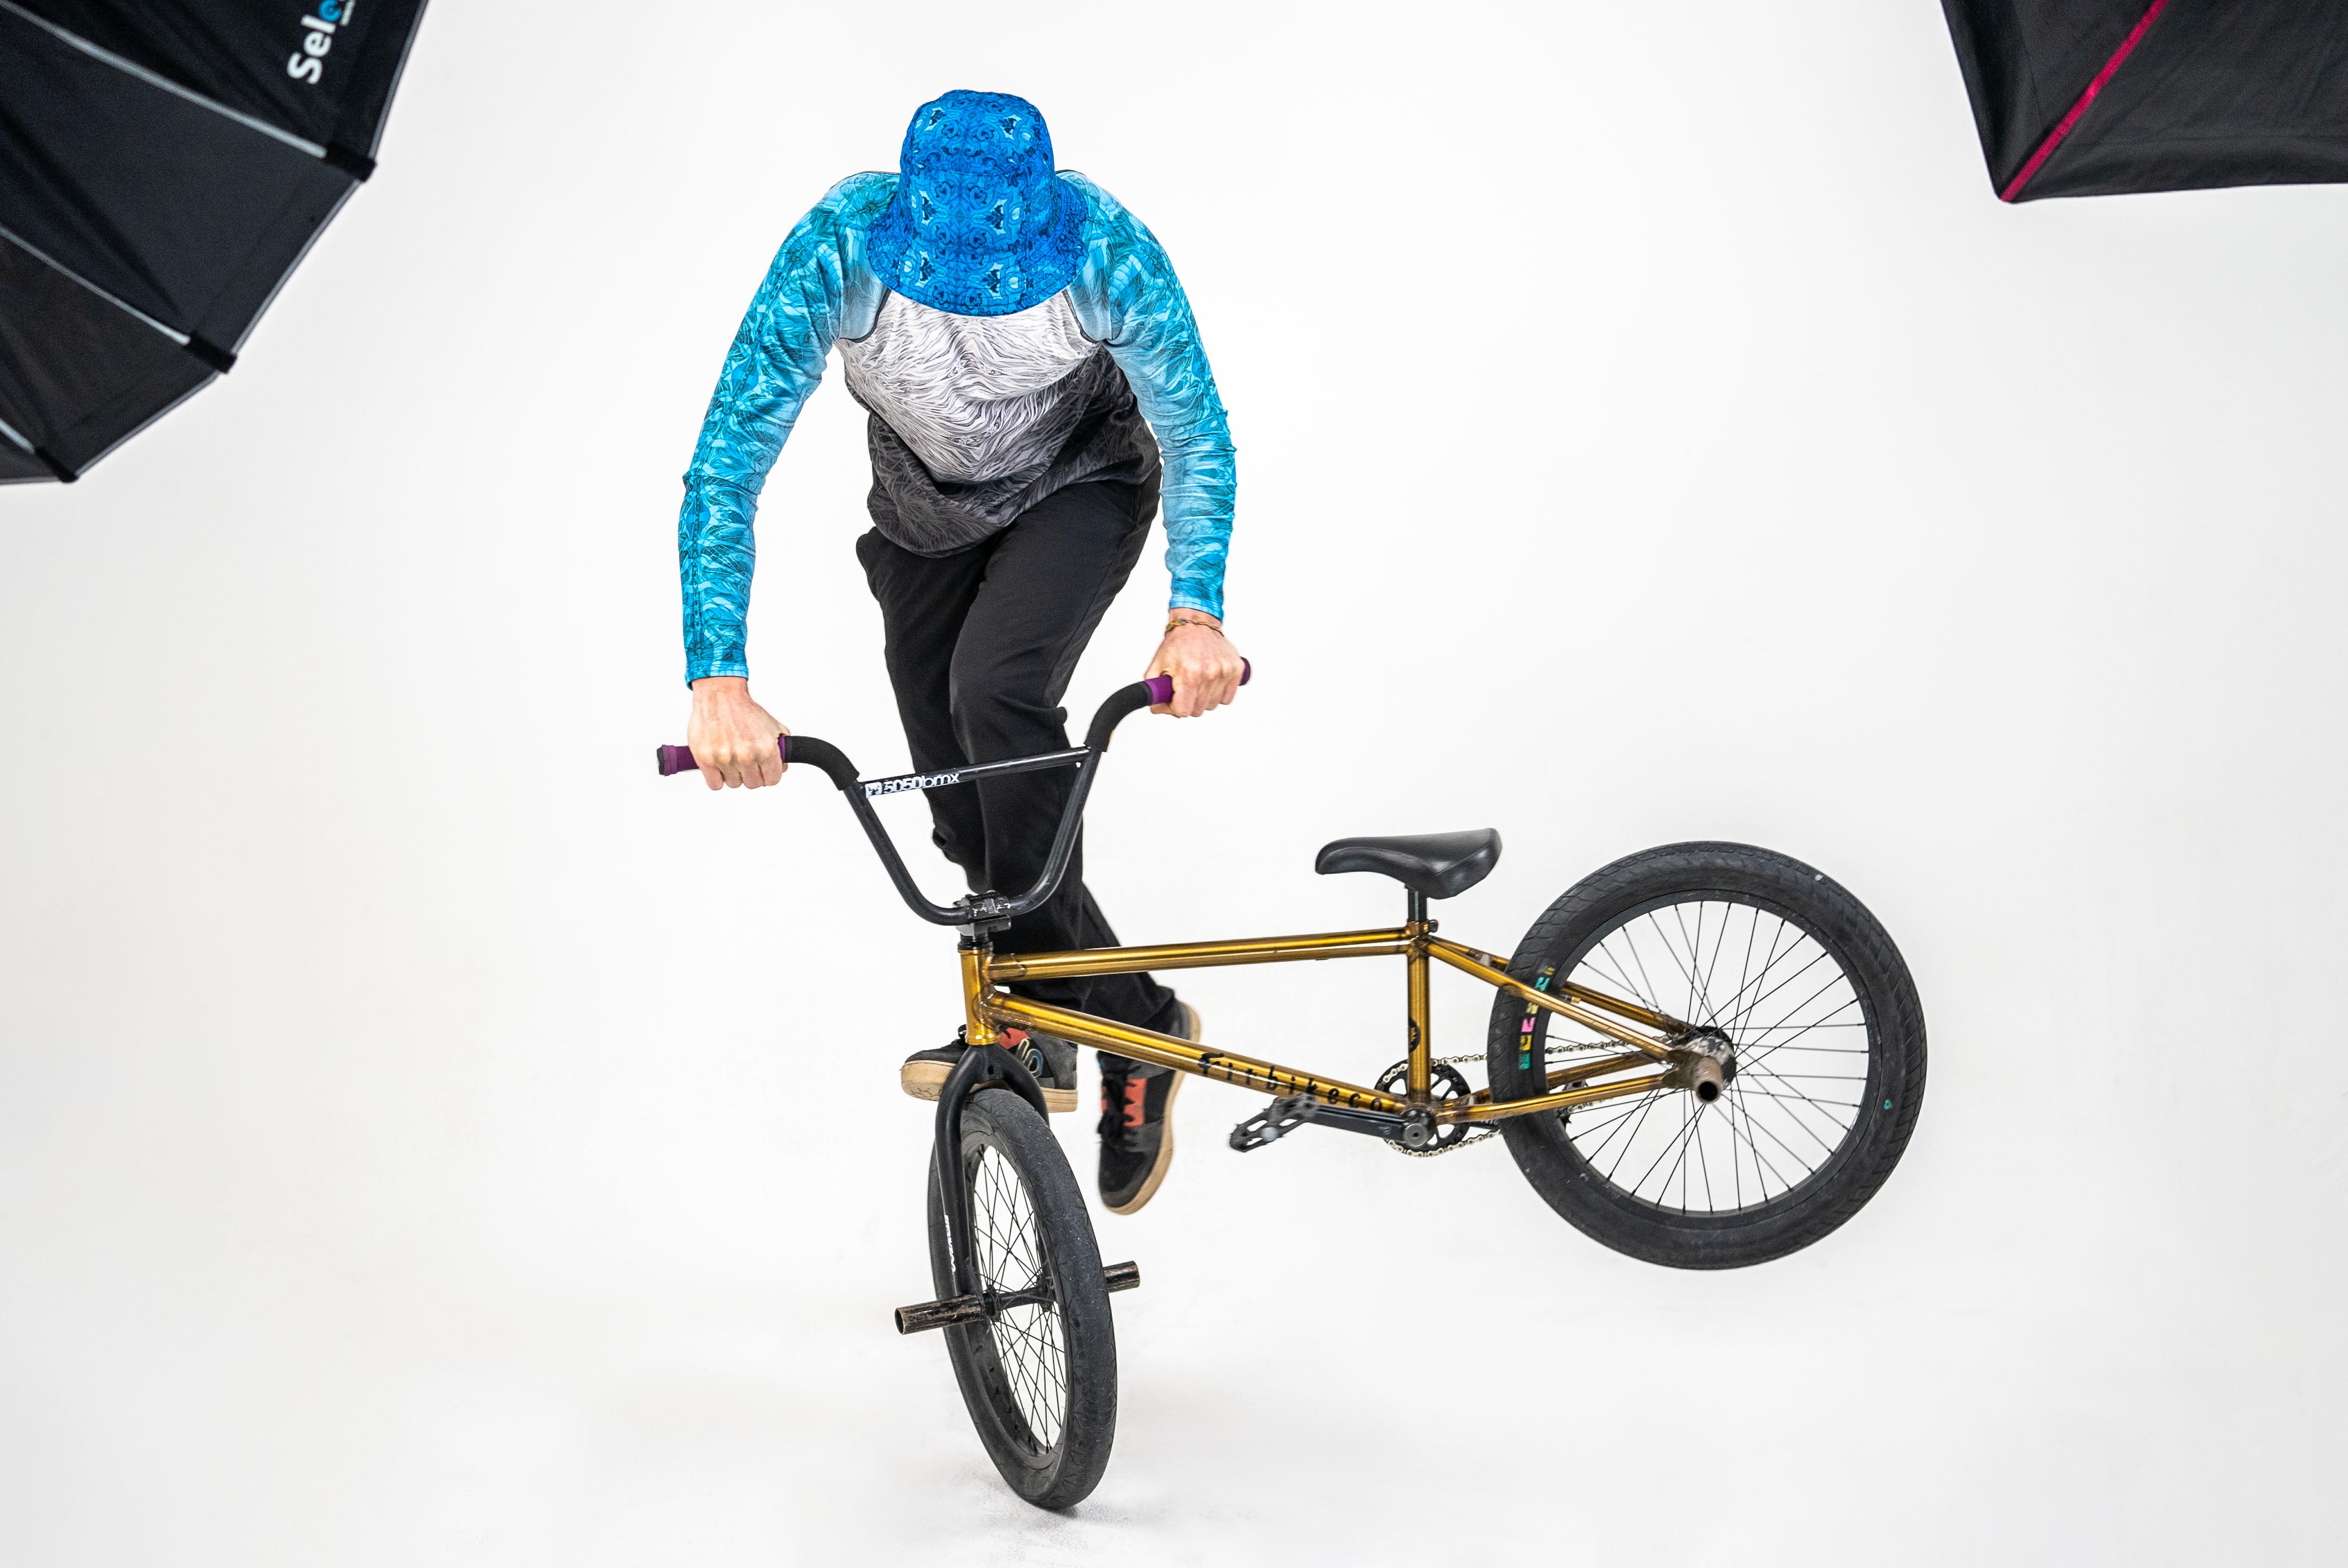 Model doing a trick on a bike and wearing a blue rash guard and bucket hat.